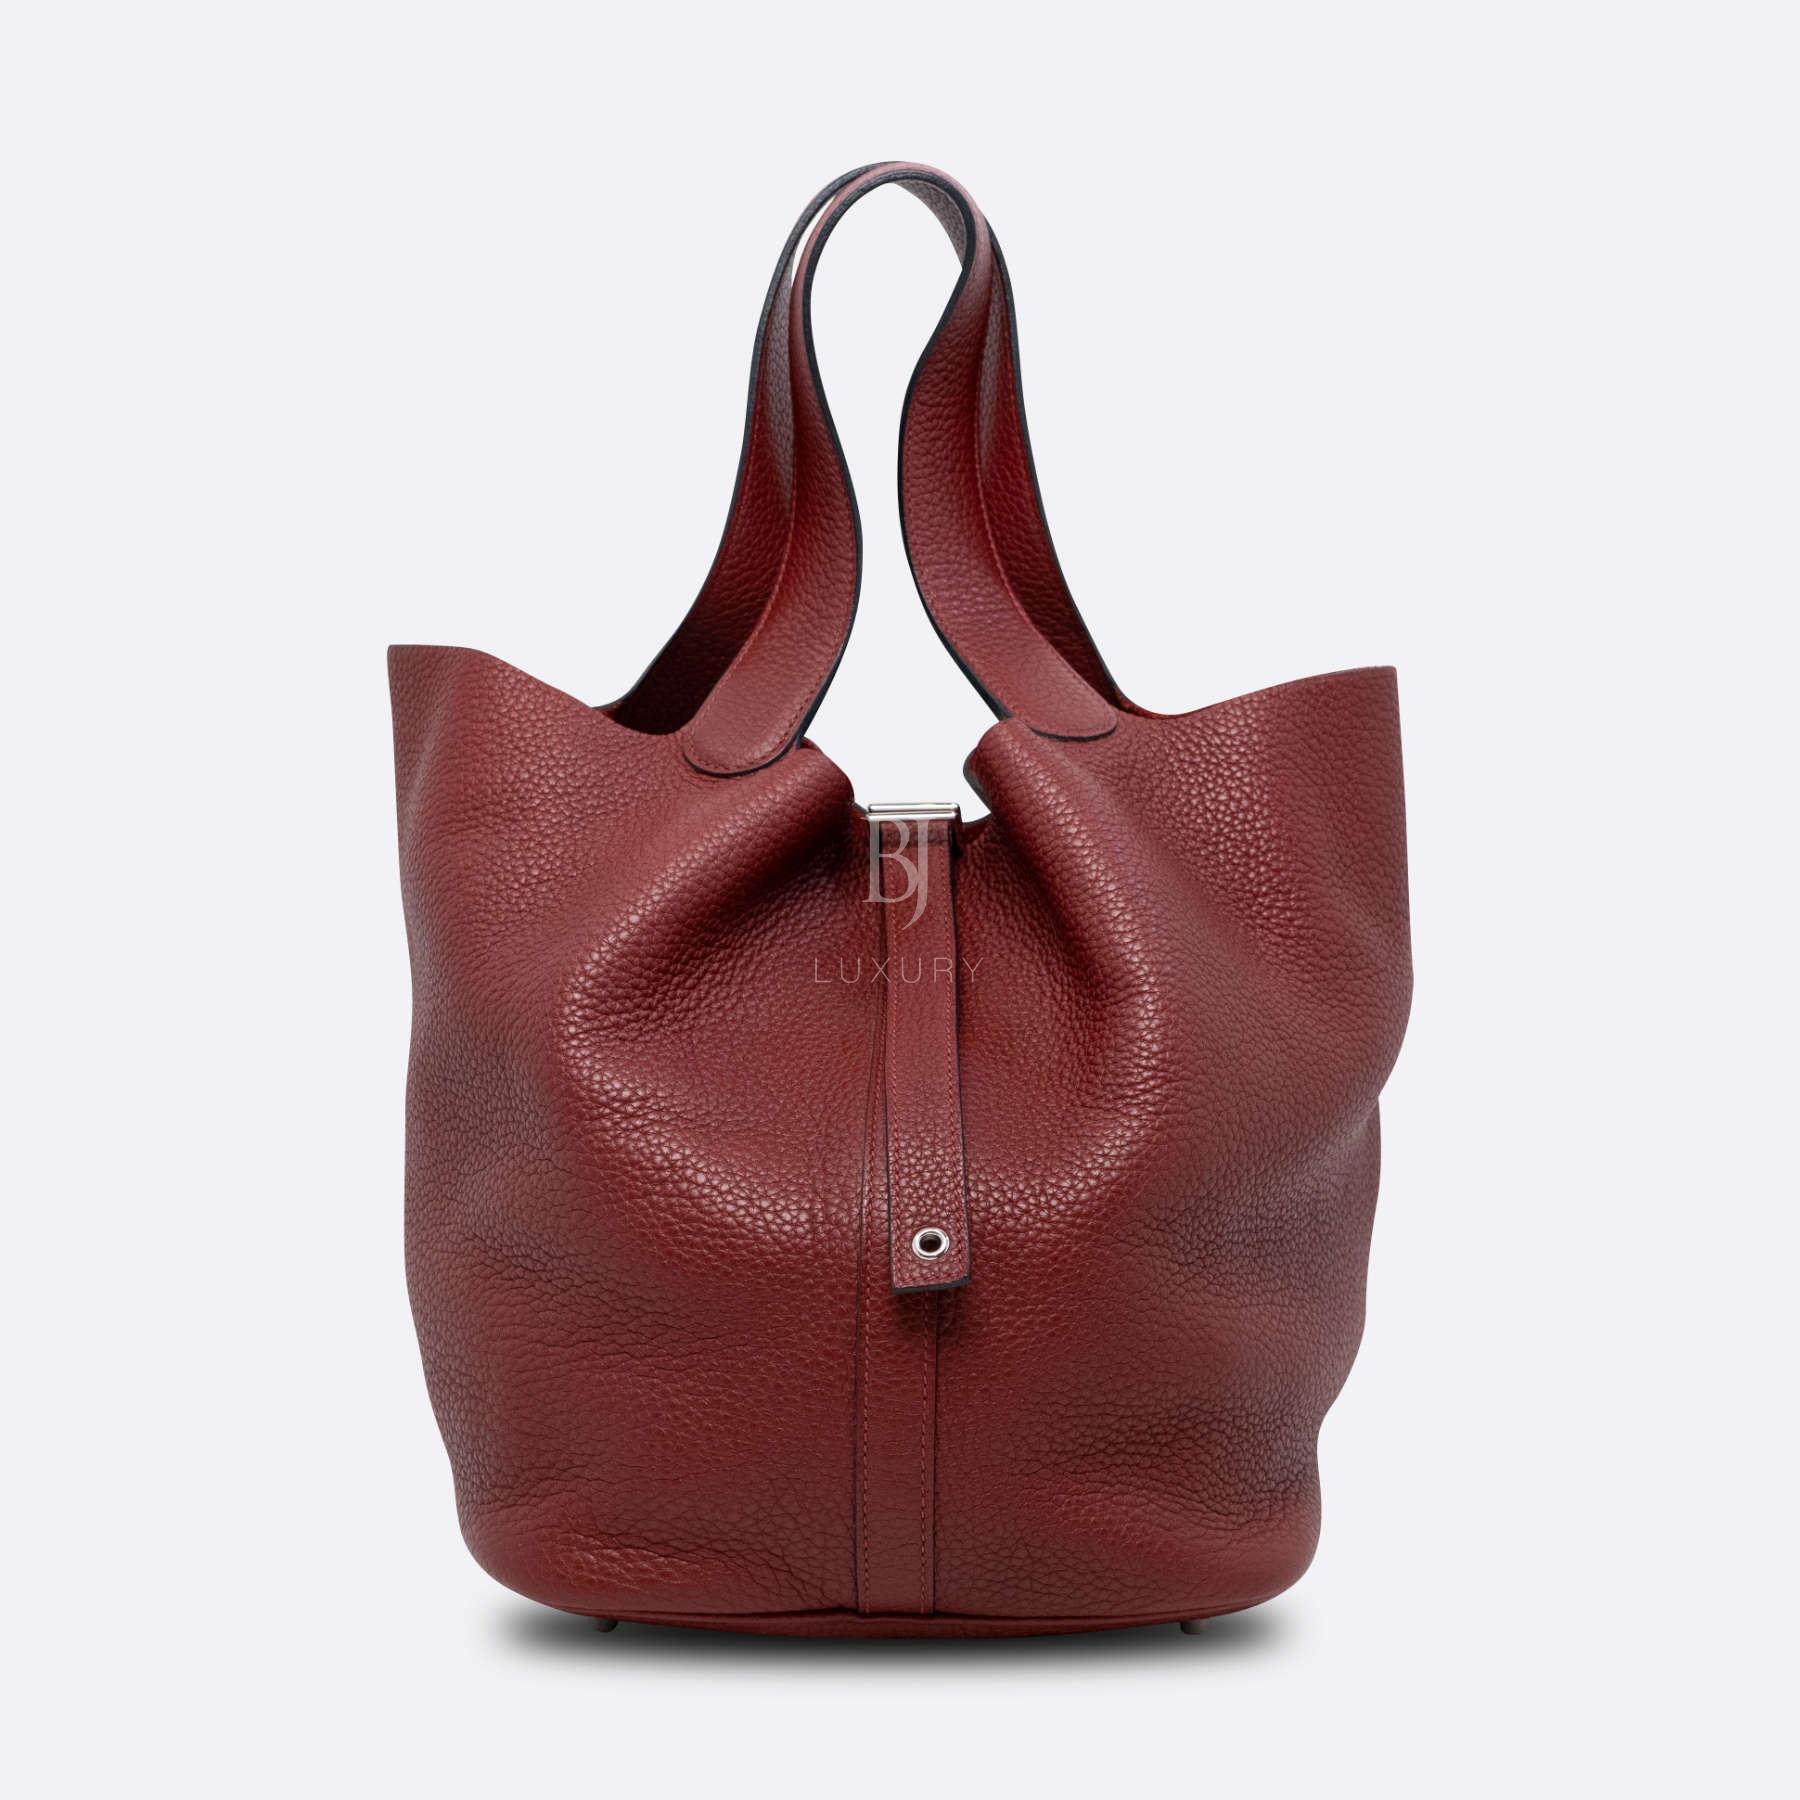 HERMES-PICOTIN-26-ROUGEH-CLEMENCE-4522 front.jpg